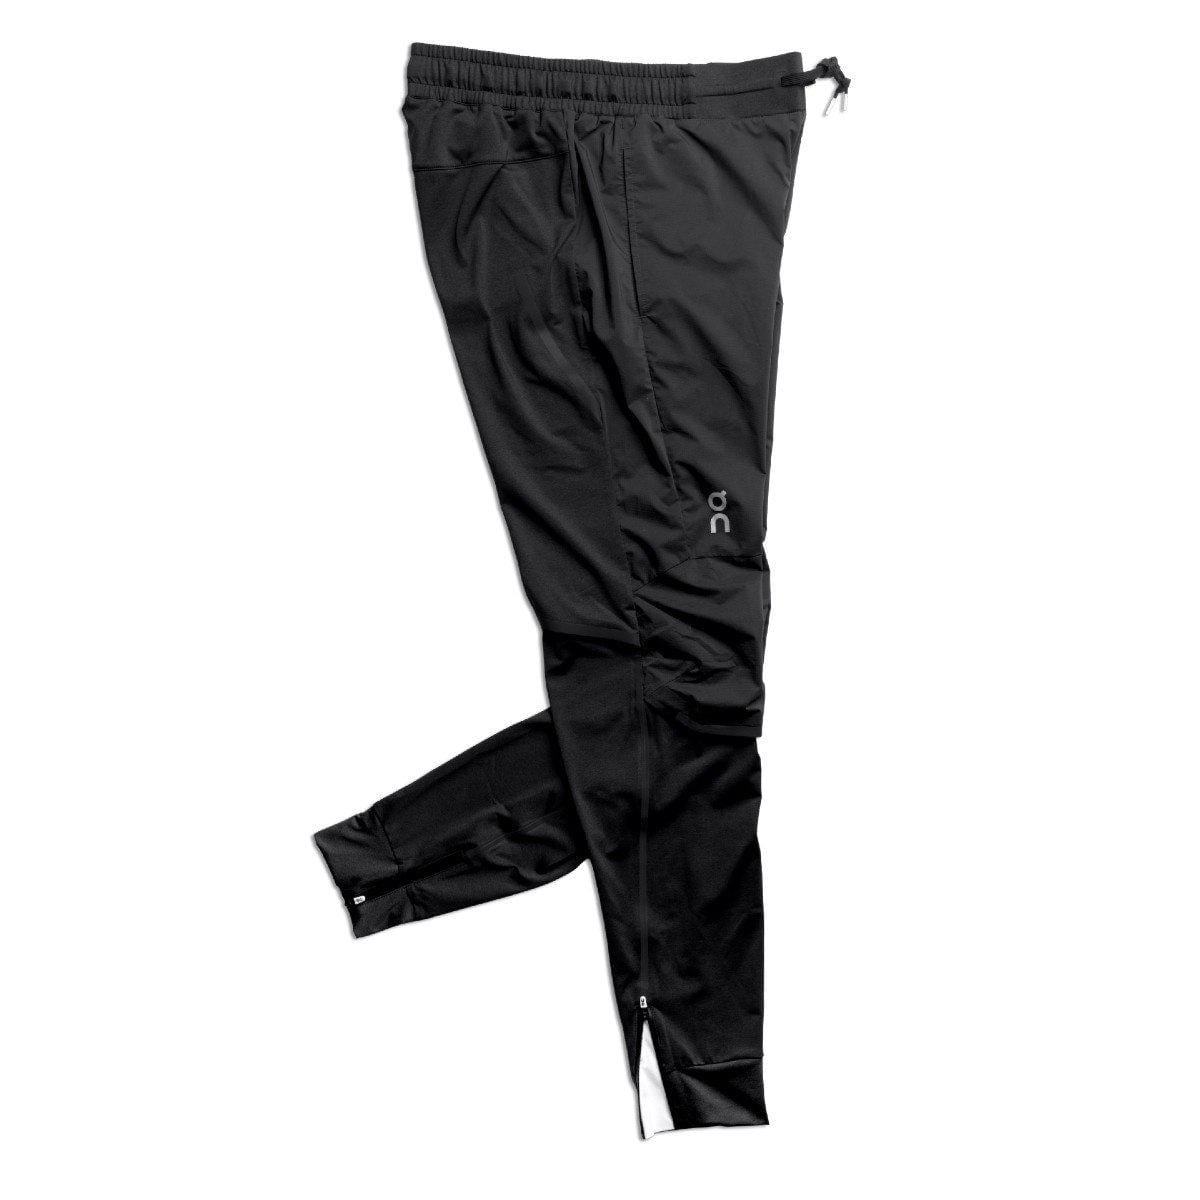 Mens Trail Running Pants by Patagonia